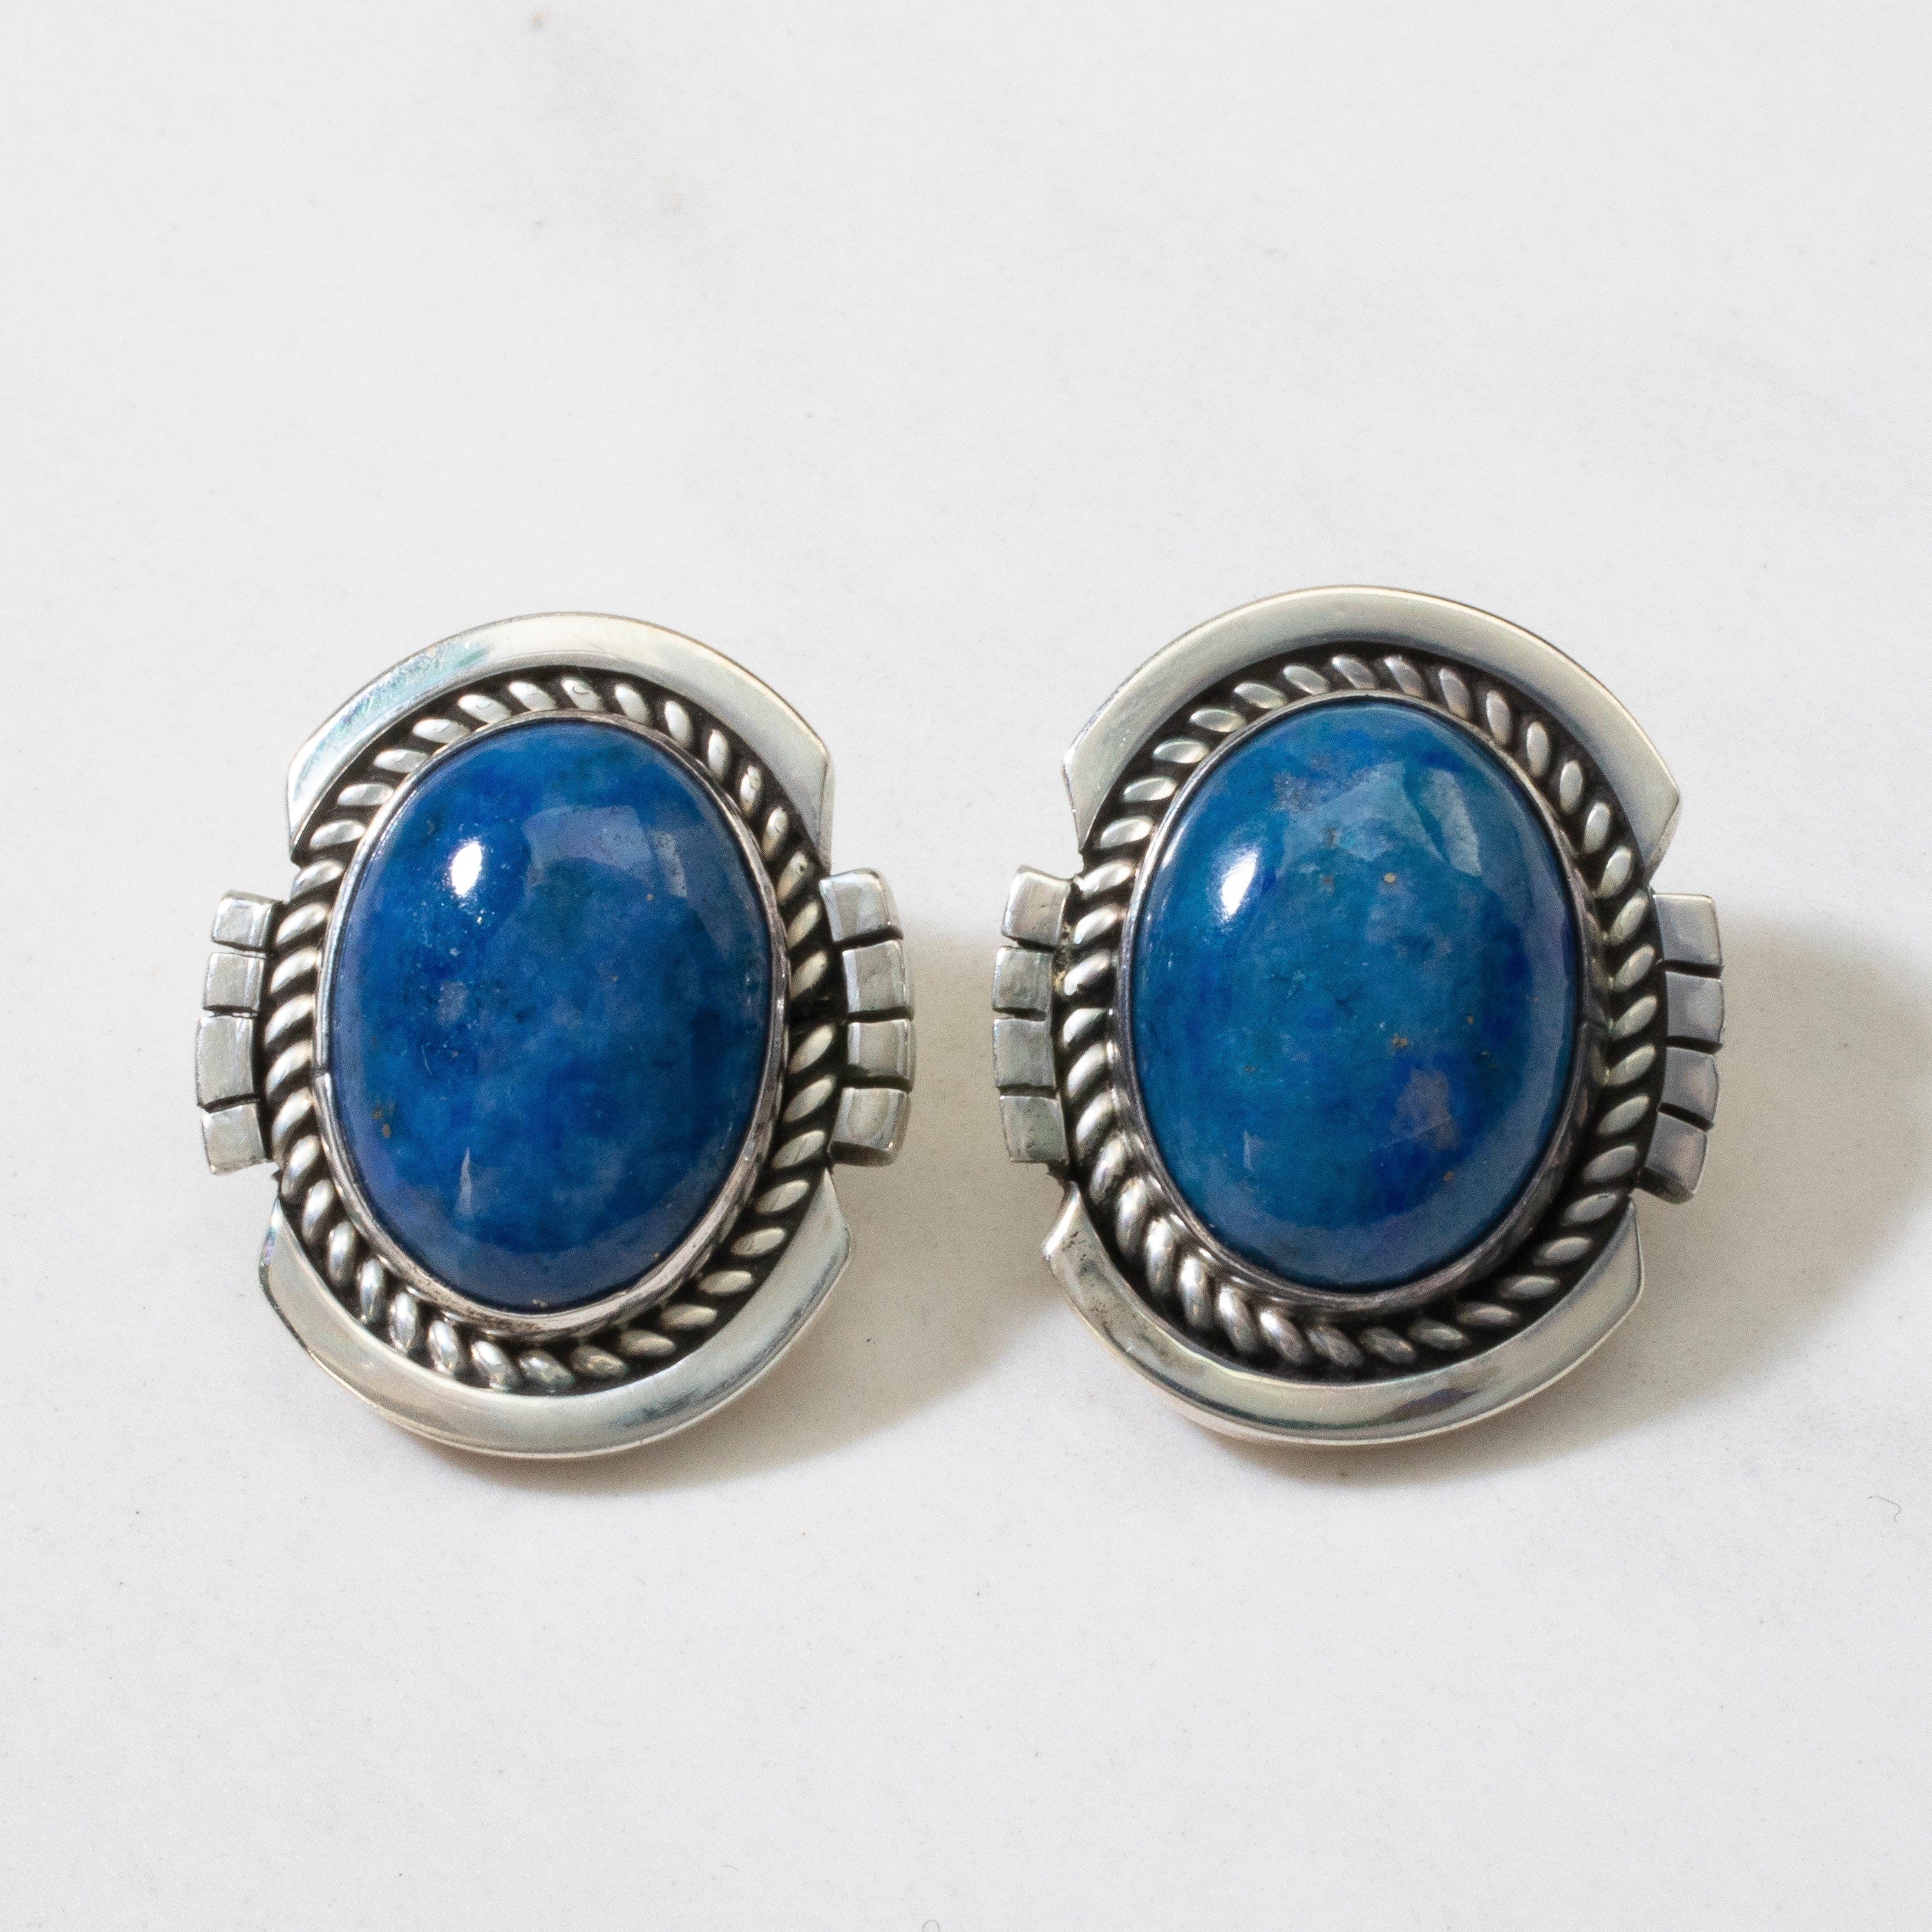 Kalifano Native American Jewelry Denim Lapis Oval Navajo USA Native American Made 925 Sterling Silver Earrings with Stud Backing NAE400.045